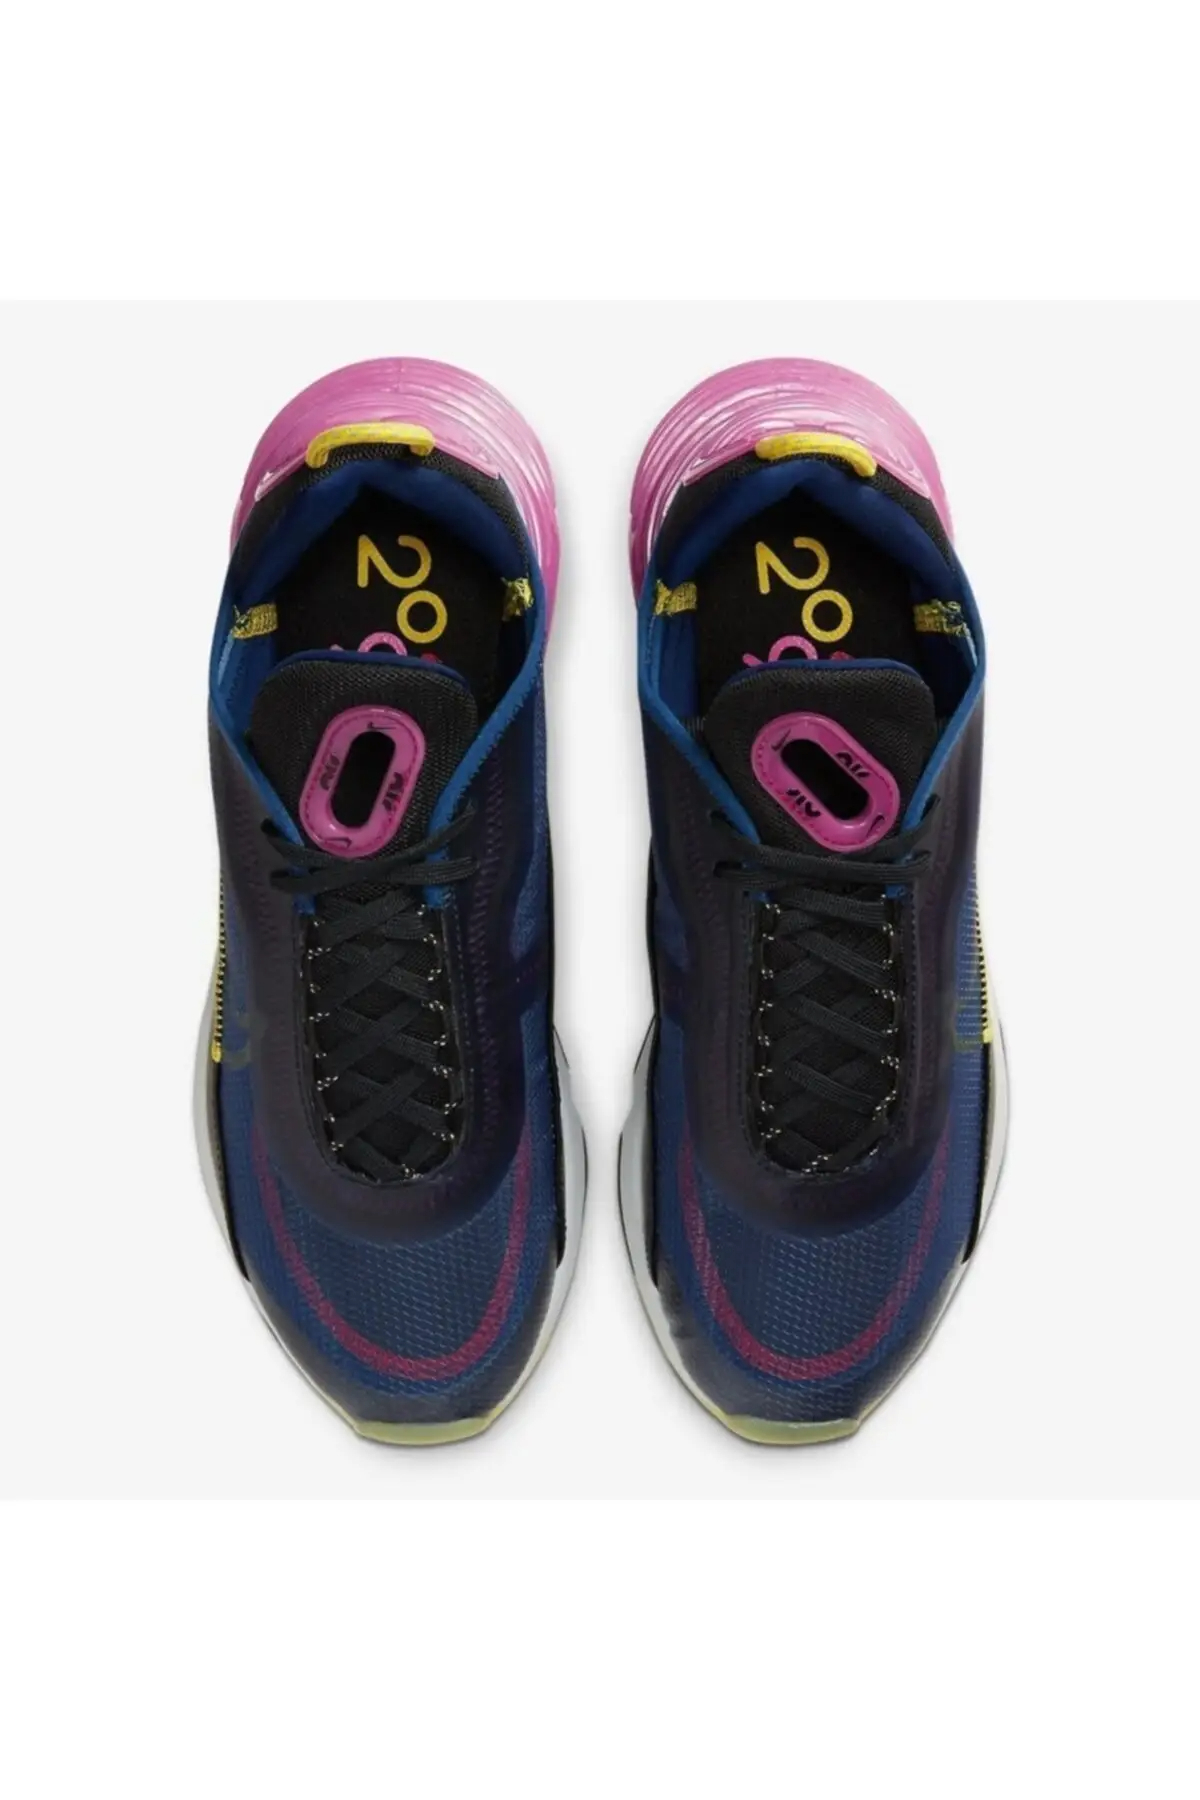 Unleash Your Style with Navy Blue Nike Shoes Women’s插图2